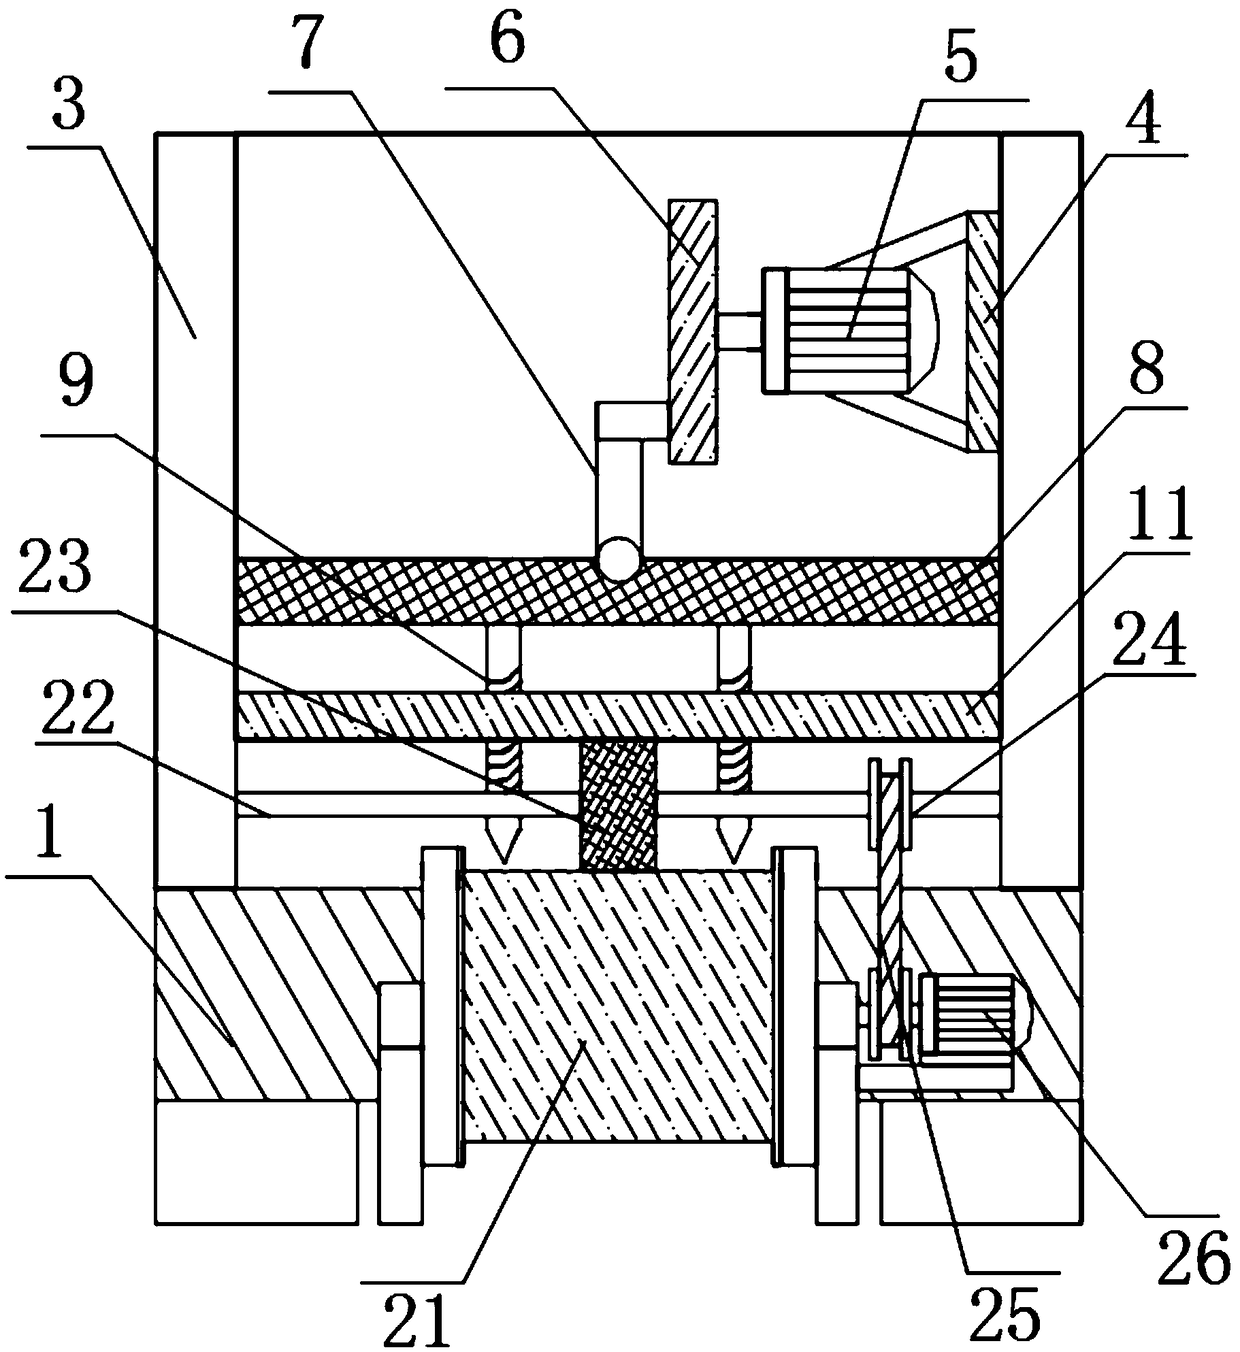 Efficient perforation device for processing shape memory titanium-nickel alloy coiled material